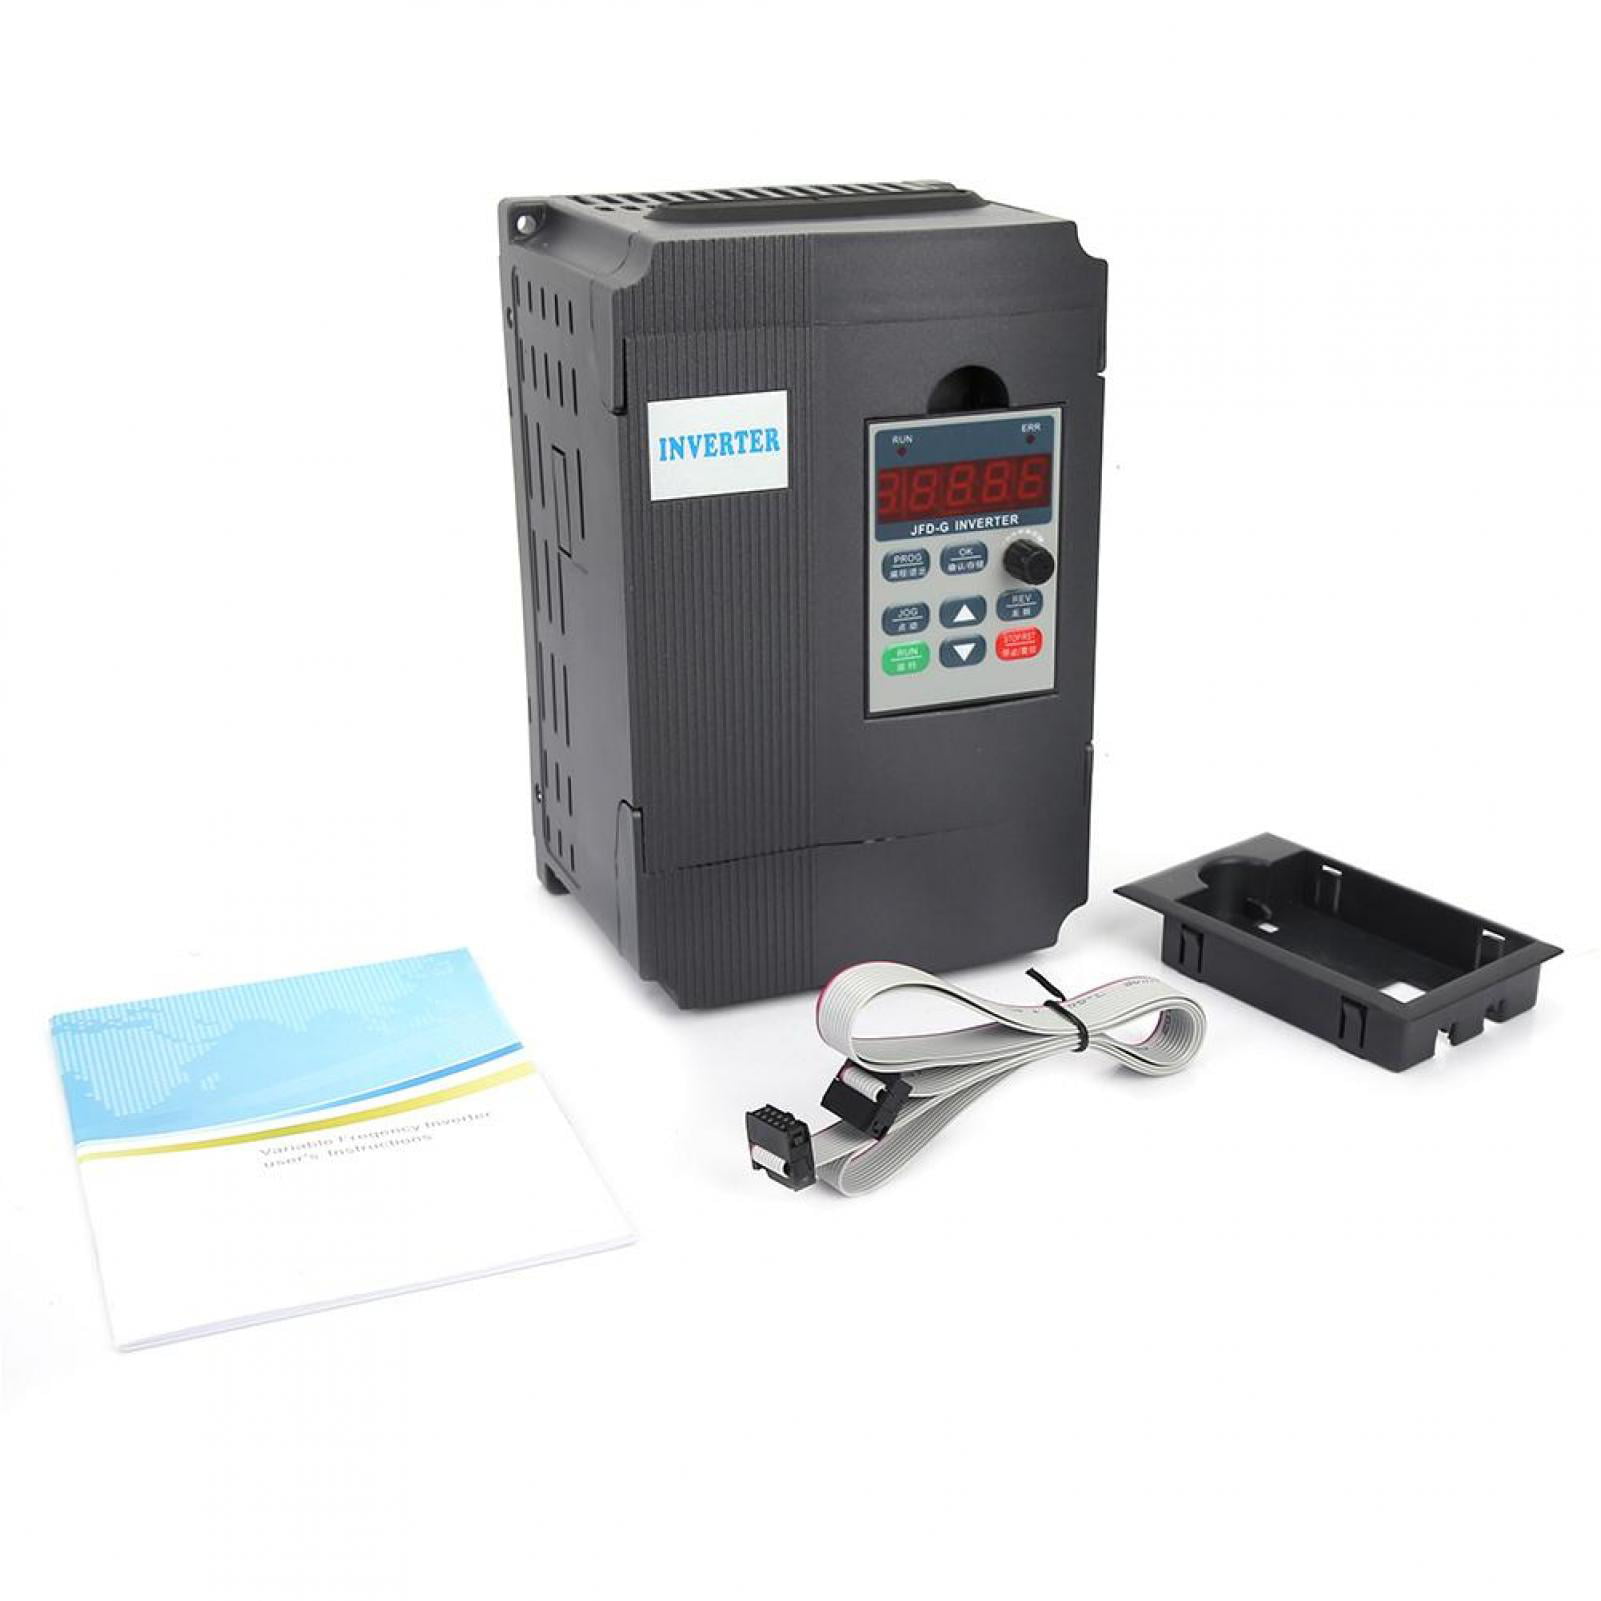 Universal Mini Variable Frequency Driver Inverter JH-S2-2T Variable Frequency Inverter Single Phase 220V Input 3-Phase 220V Output 2.2KW 